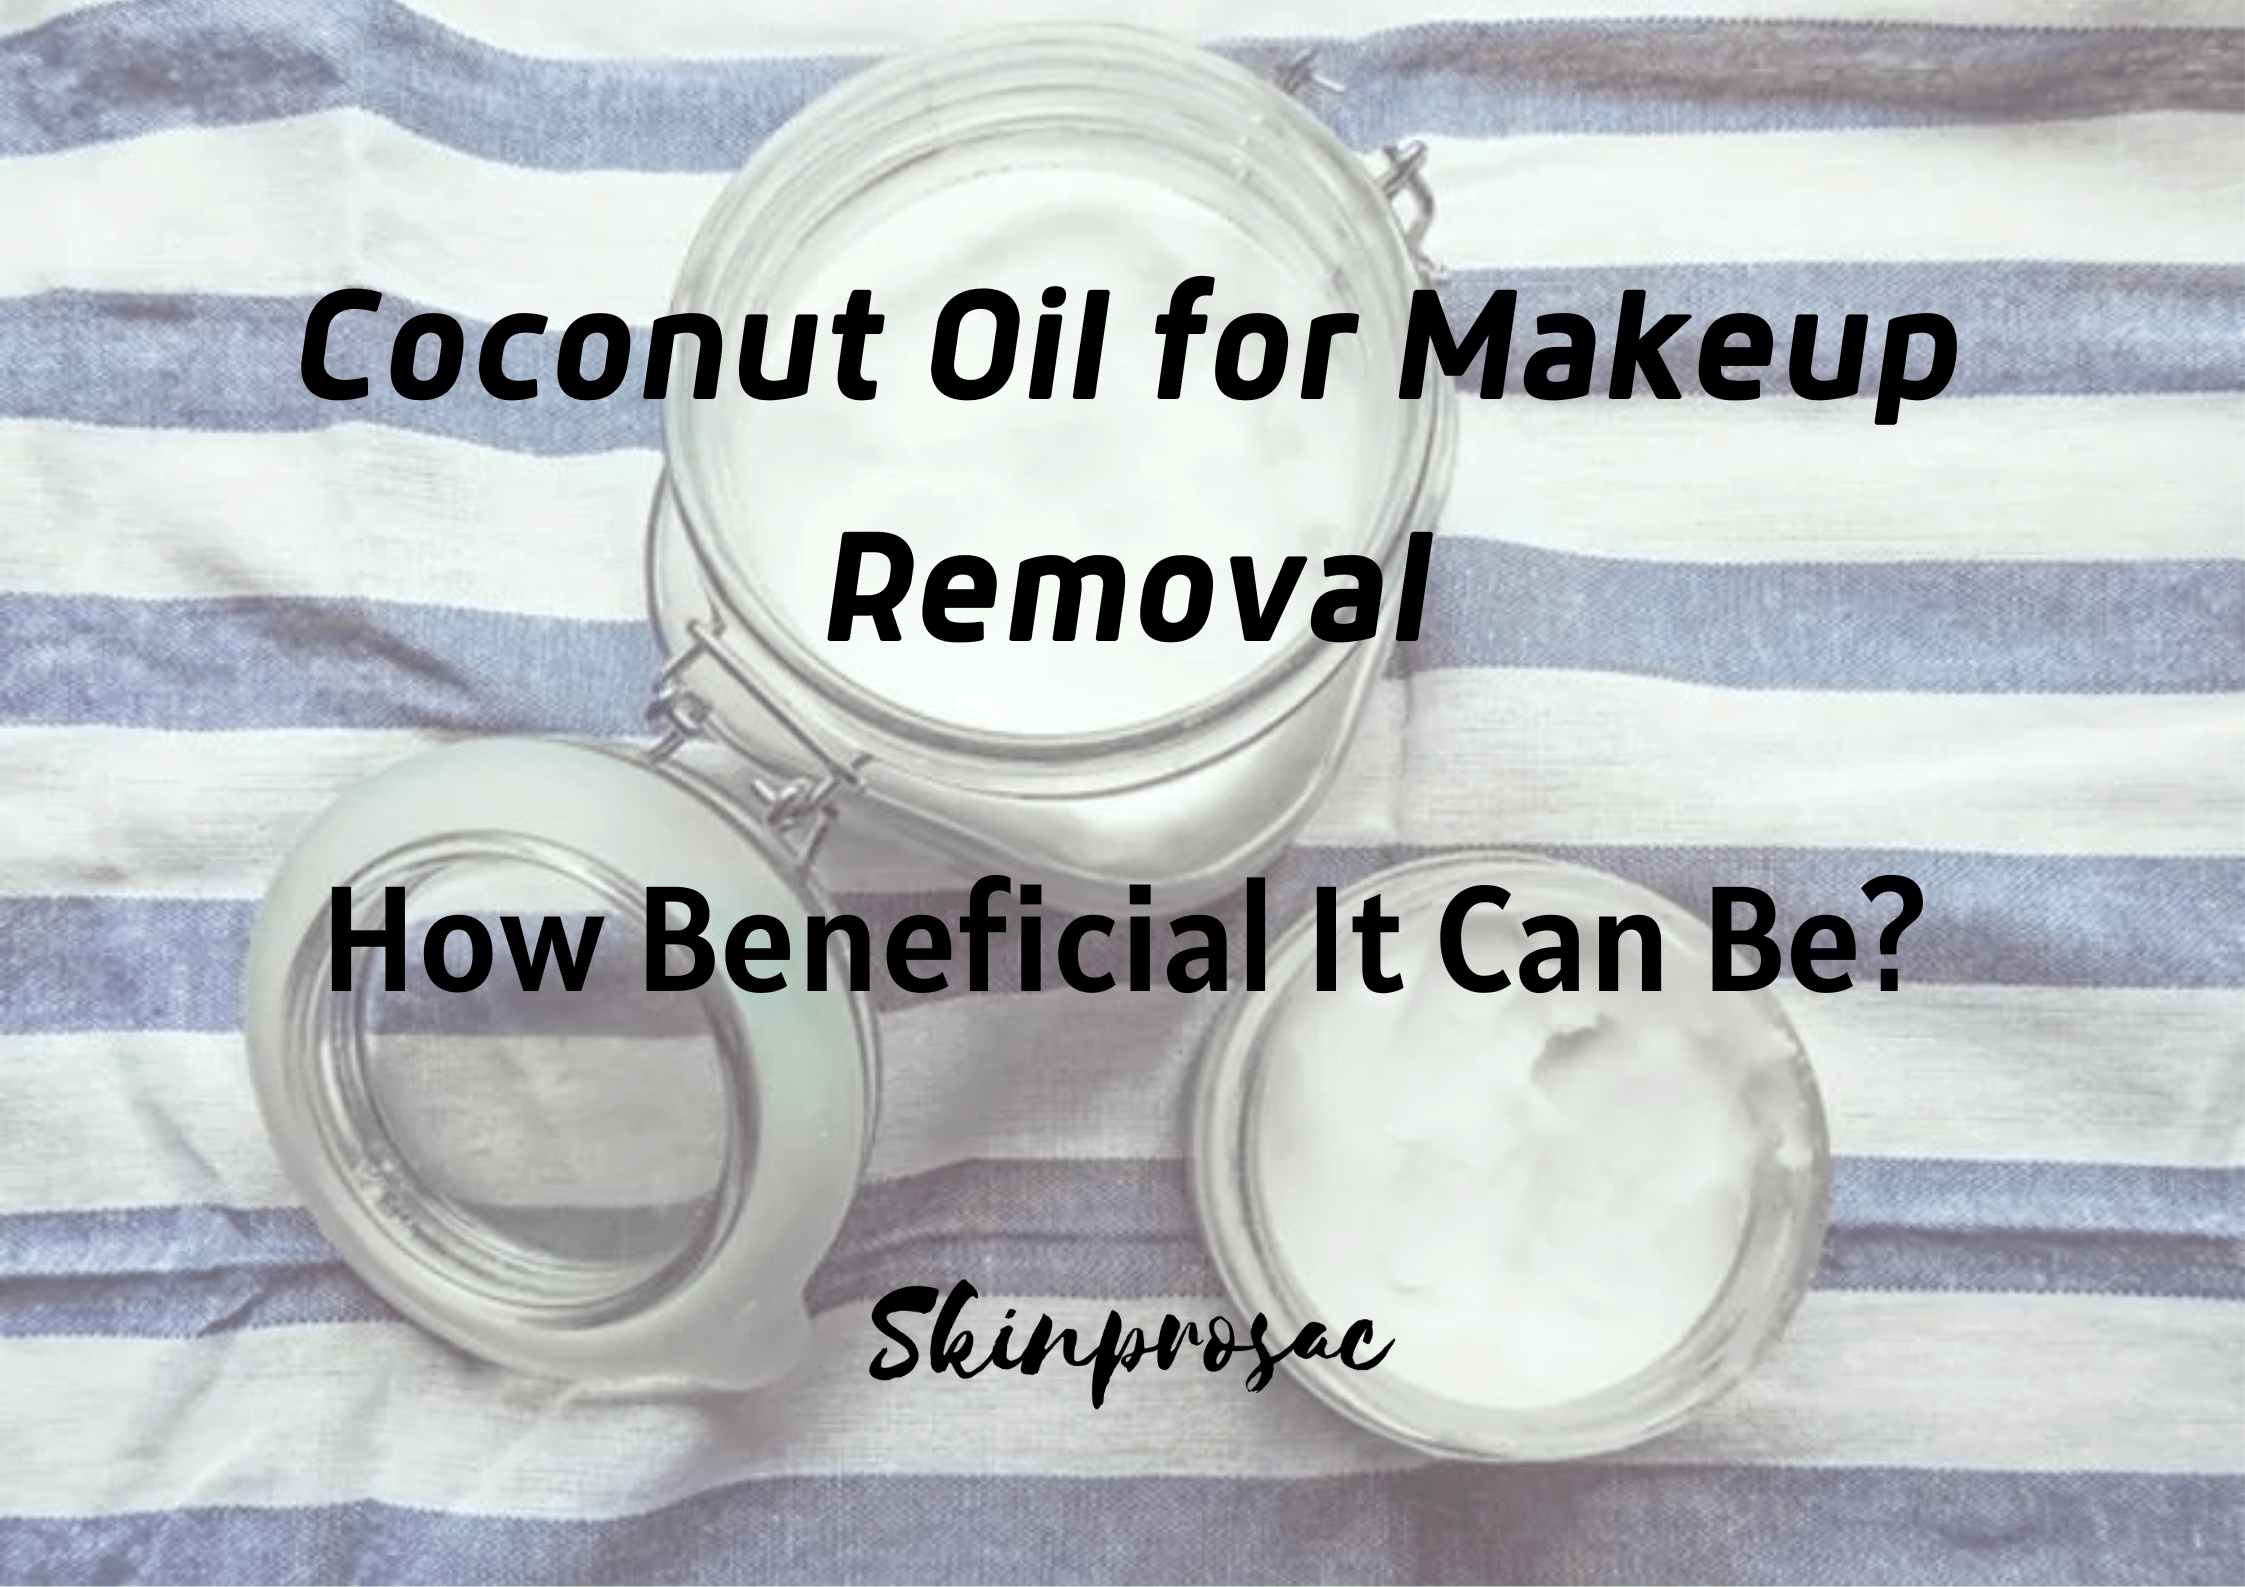 Coconut Oil for Makeup Removal